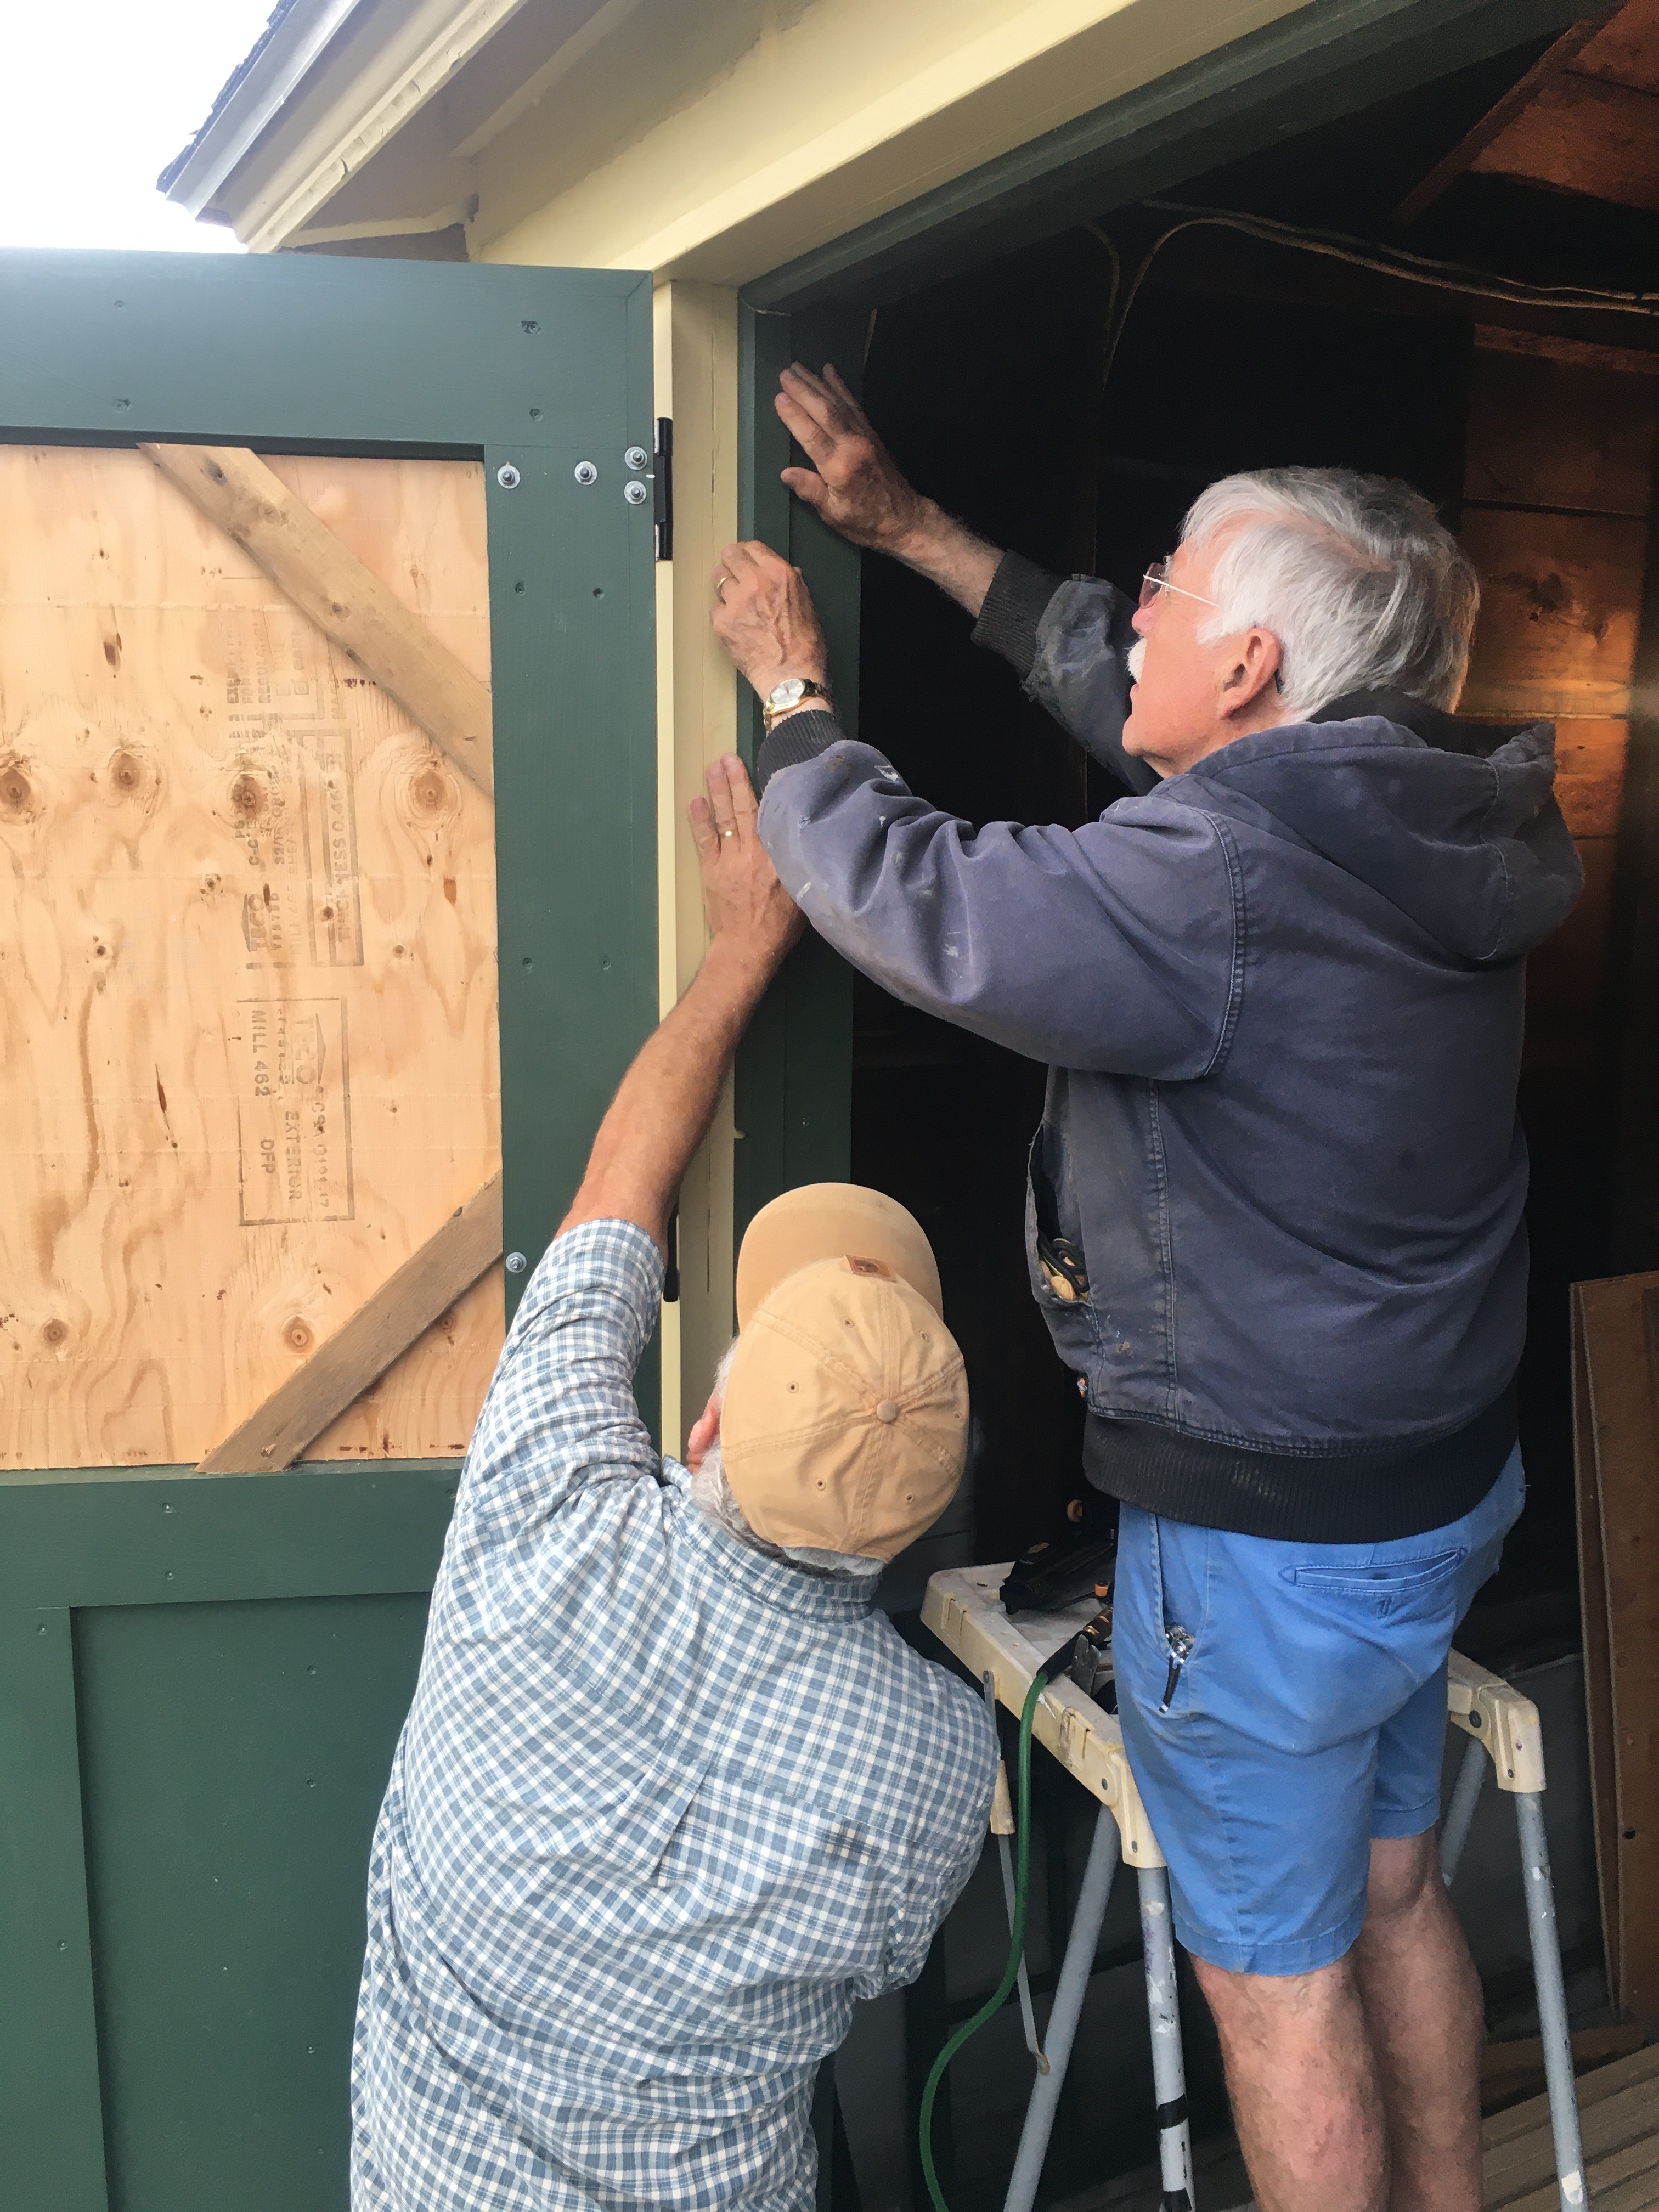 Volunteer Peter Anthony (on ladder) assists facilities director brian greenwood with precise and accurate positioning of a trim board after the first replacement door was hung on the five-bay garage.